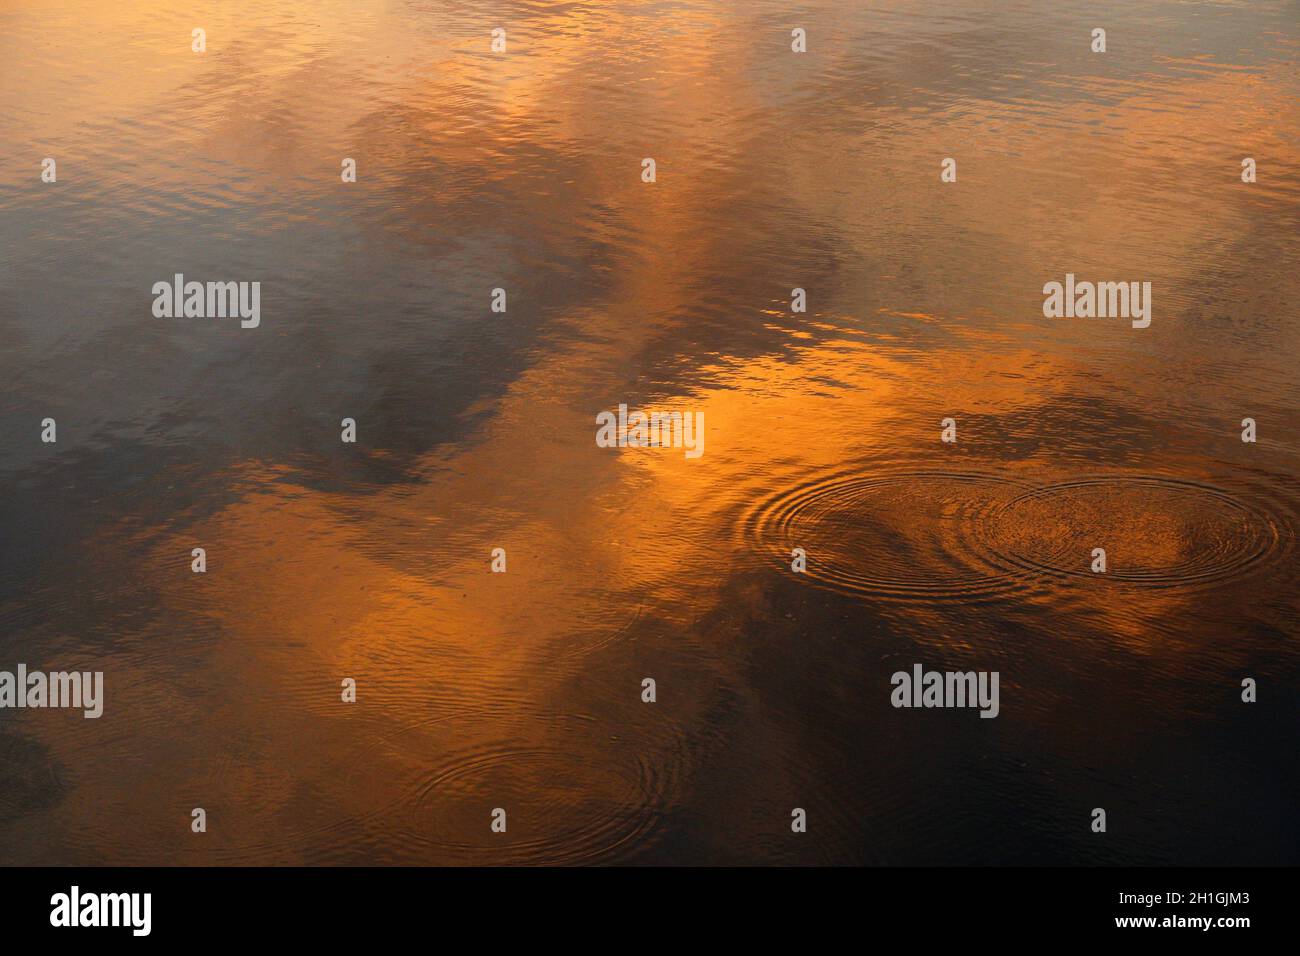 Abstract evening reflections of the clouds in the calm water. Stock Photo